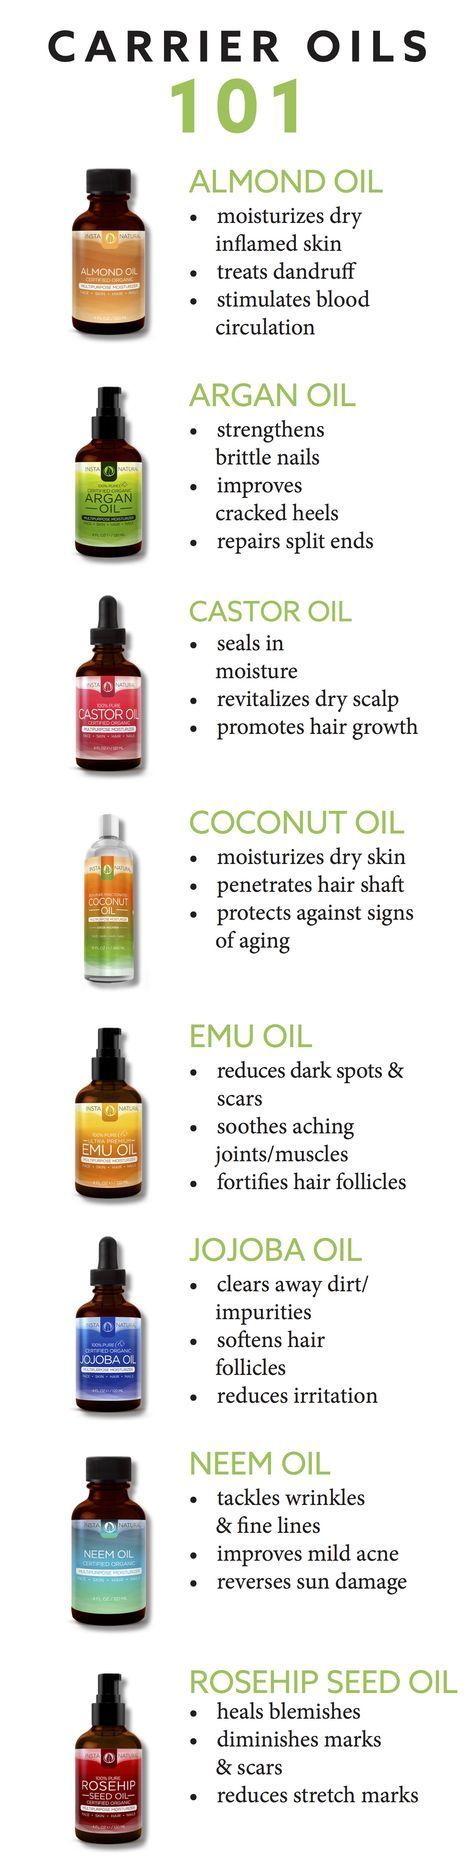 Discover all the amazing benefits of our carrier oils. 20% off this weekend only…